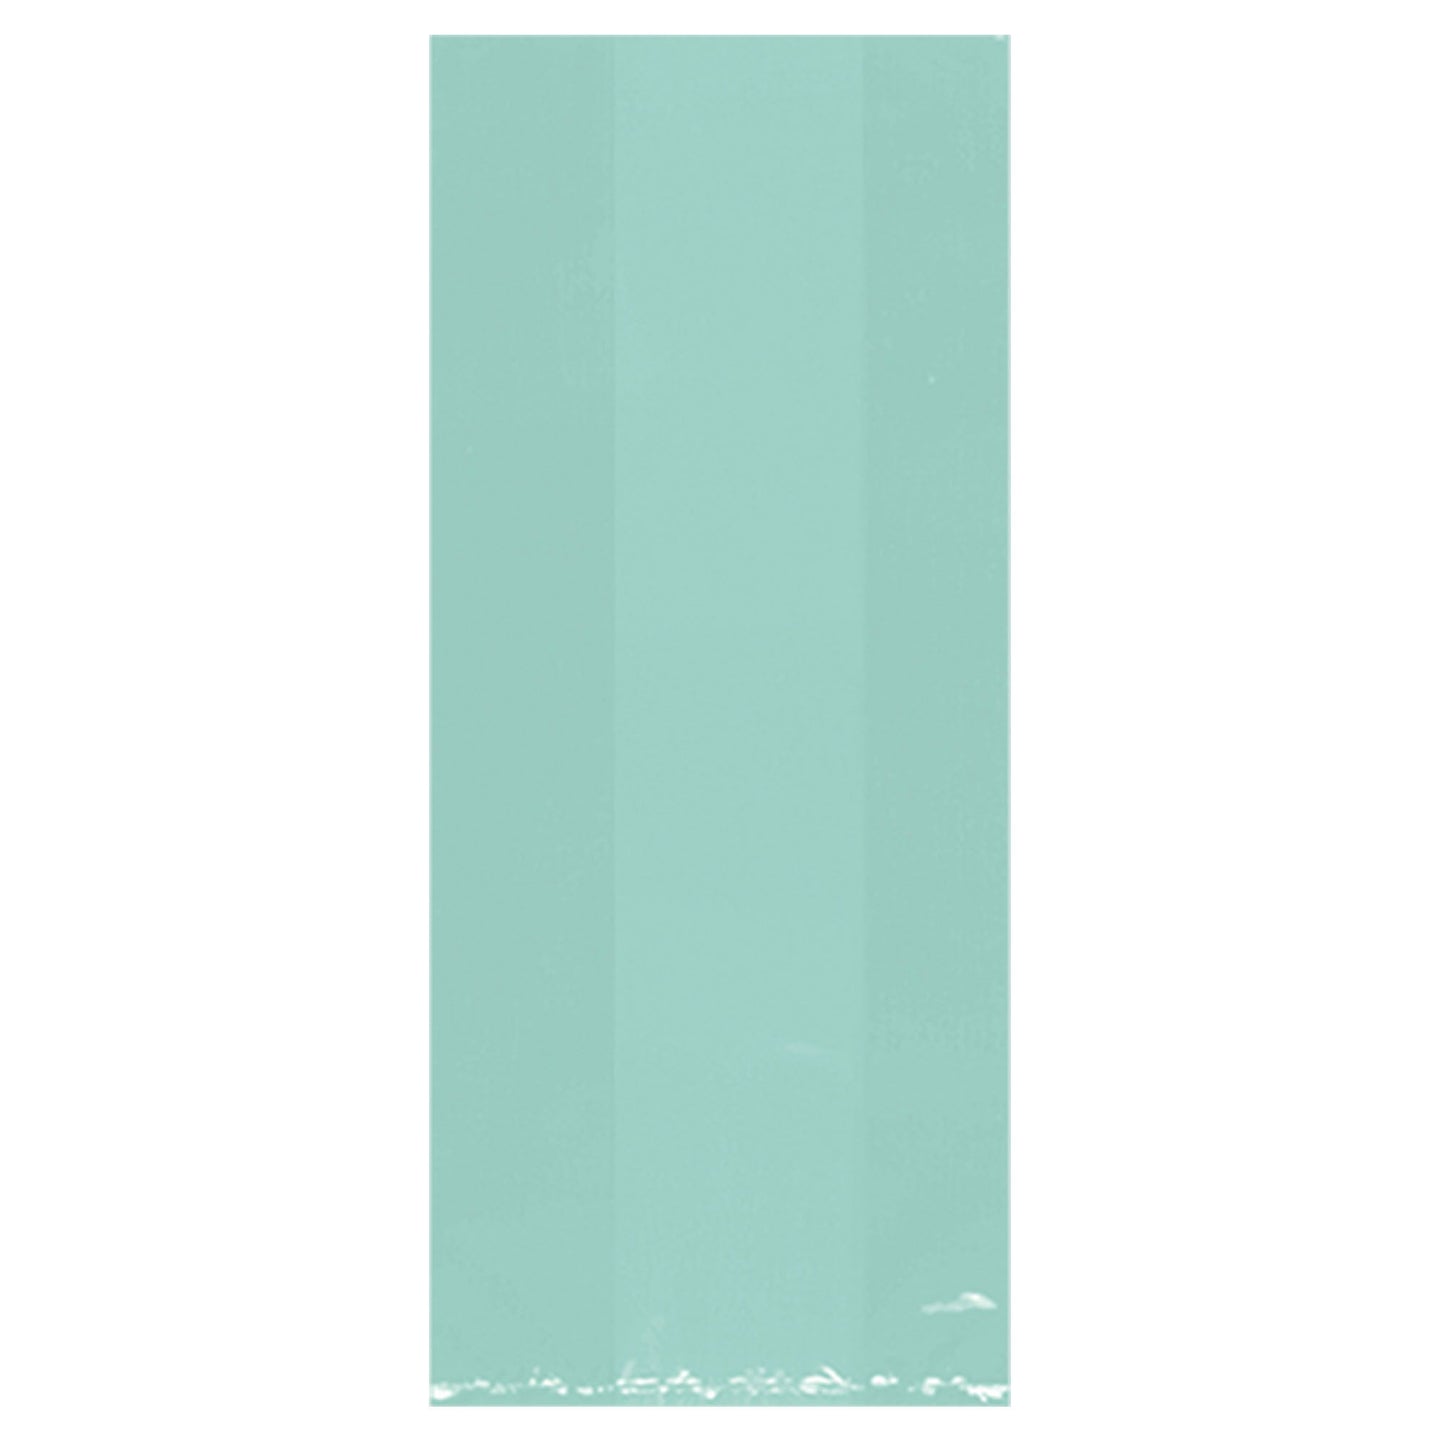 Cello Party Bags - Robins Egg Blue 25ct